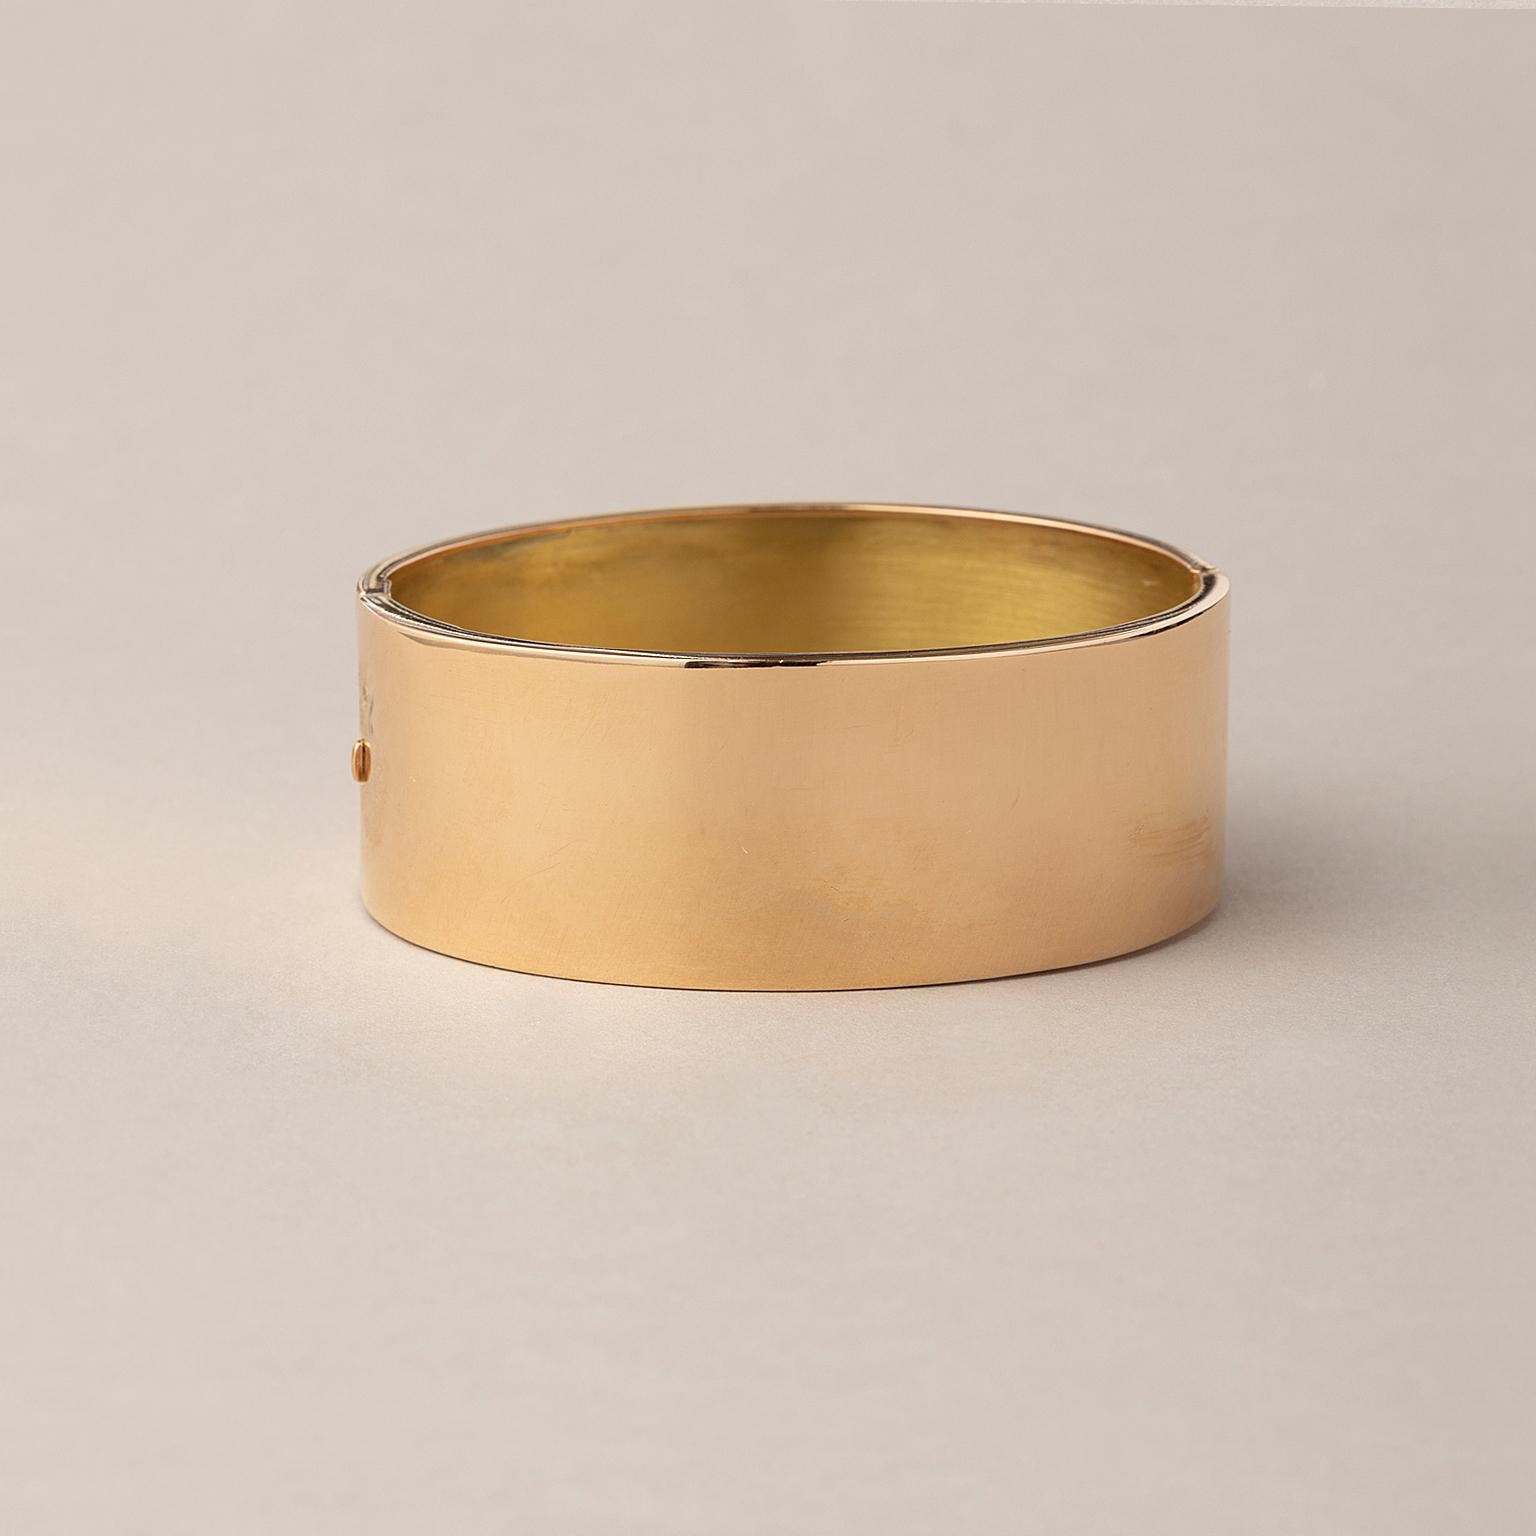 A wide 18 carat yellow gold bangle bracelet, made in France, end 19th century.

weight: 42.9 grams
size: 18+ cm. fits a wrist of  15 - 17.5-18 cm
width: 2.4 cm